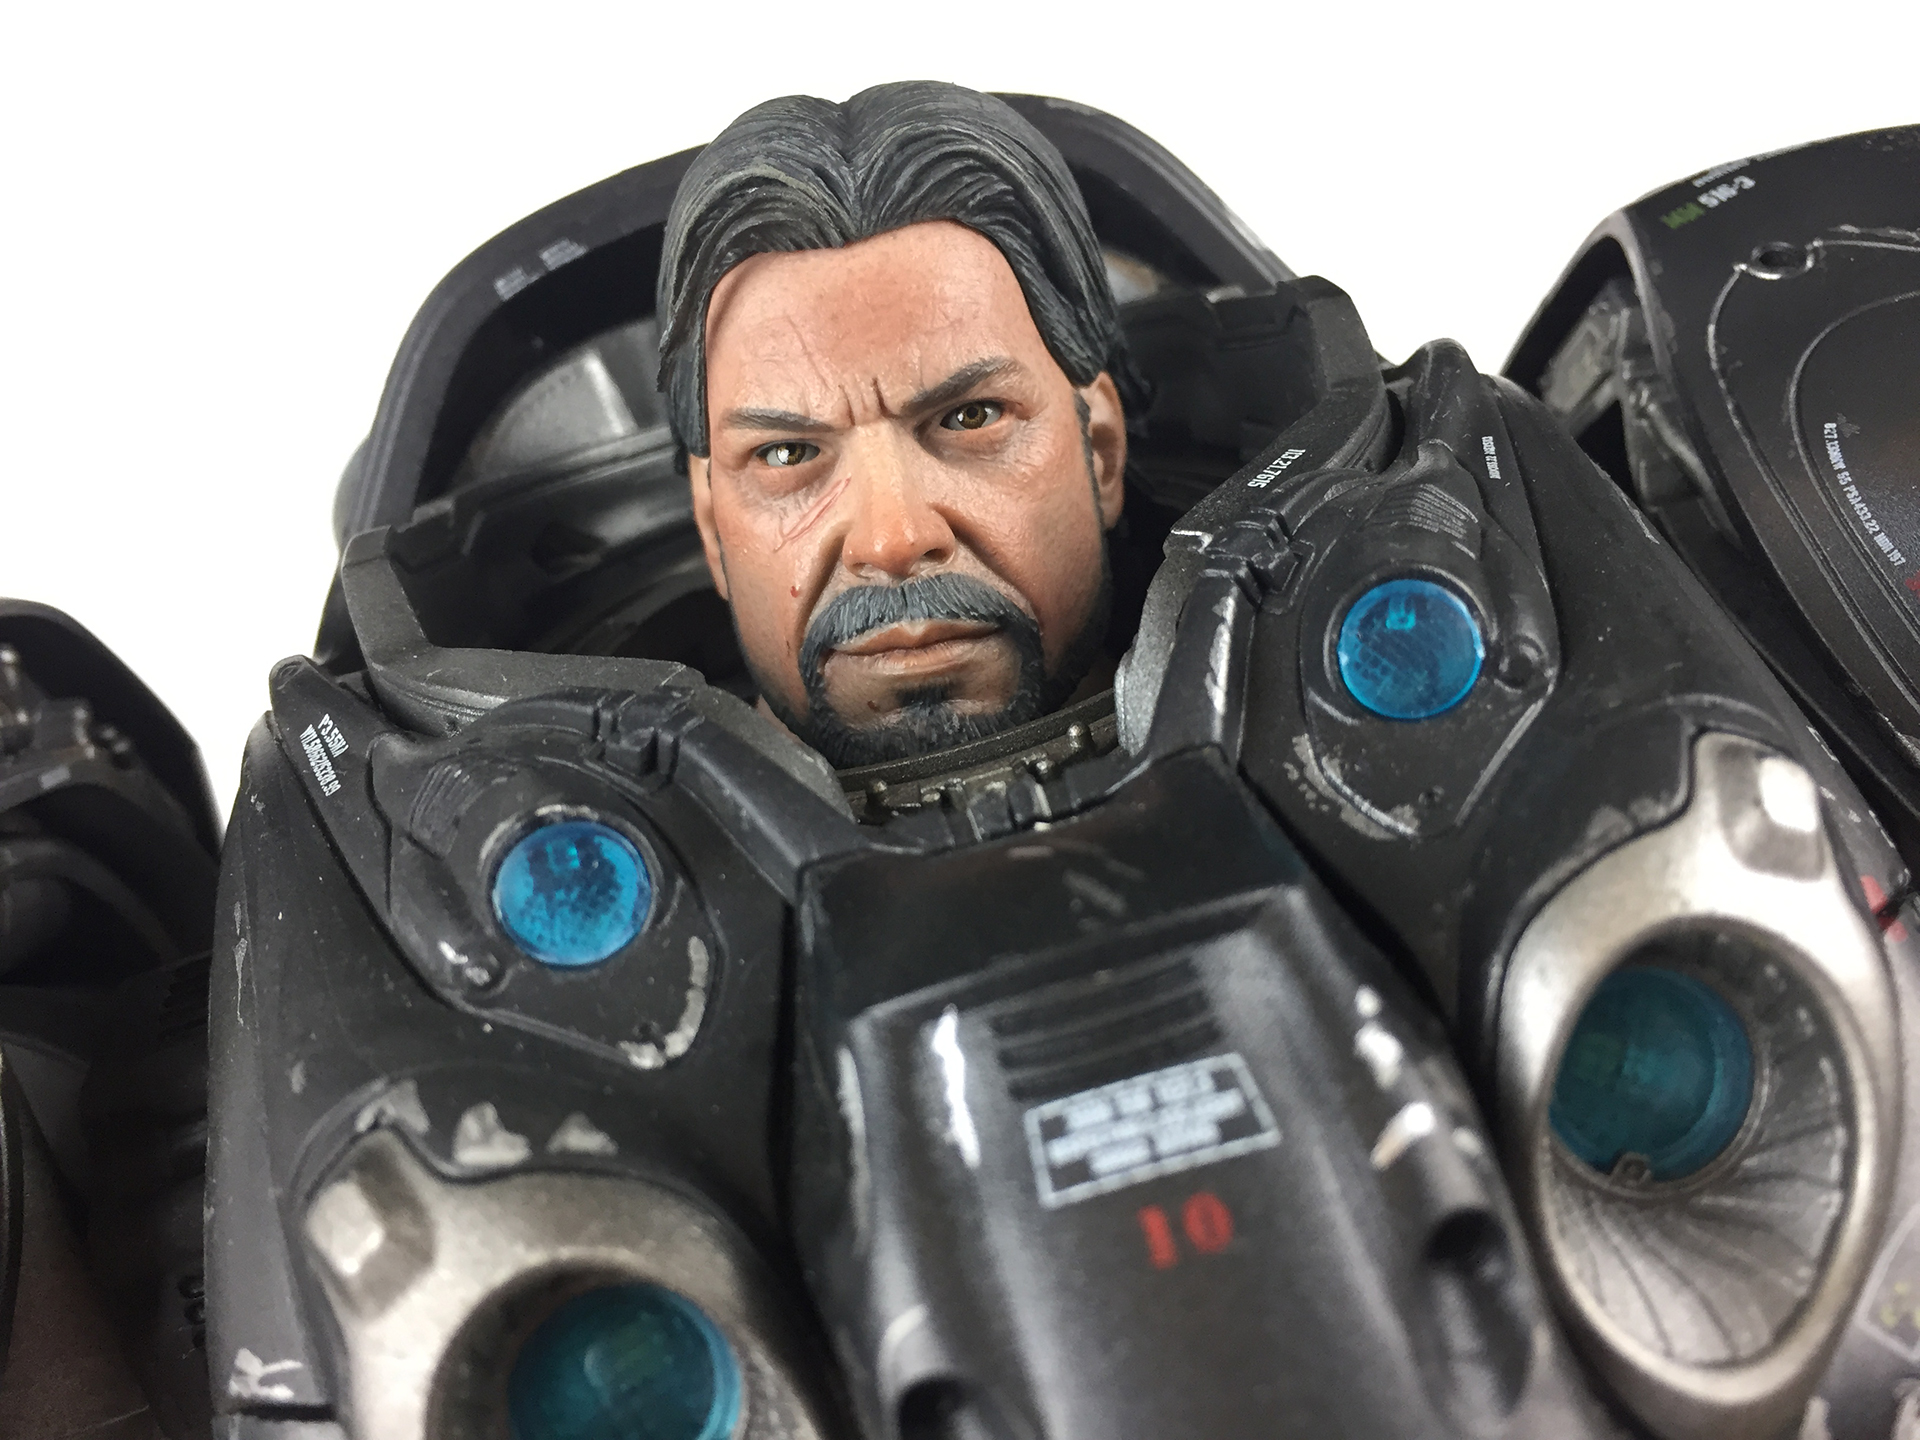 The Ultimate StarCraft Action Figure